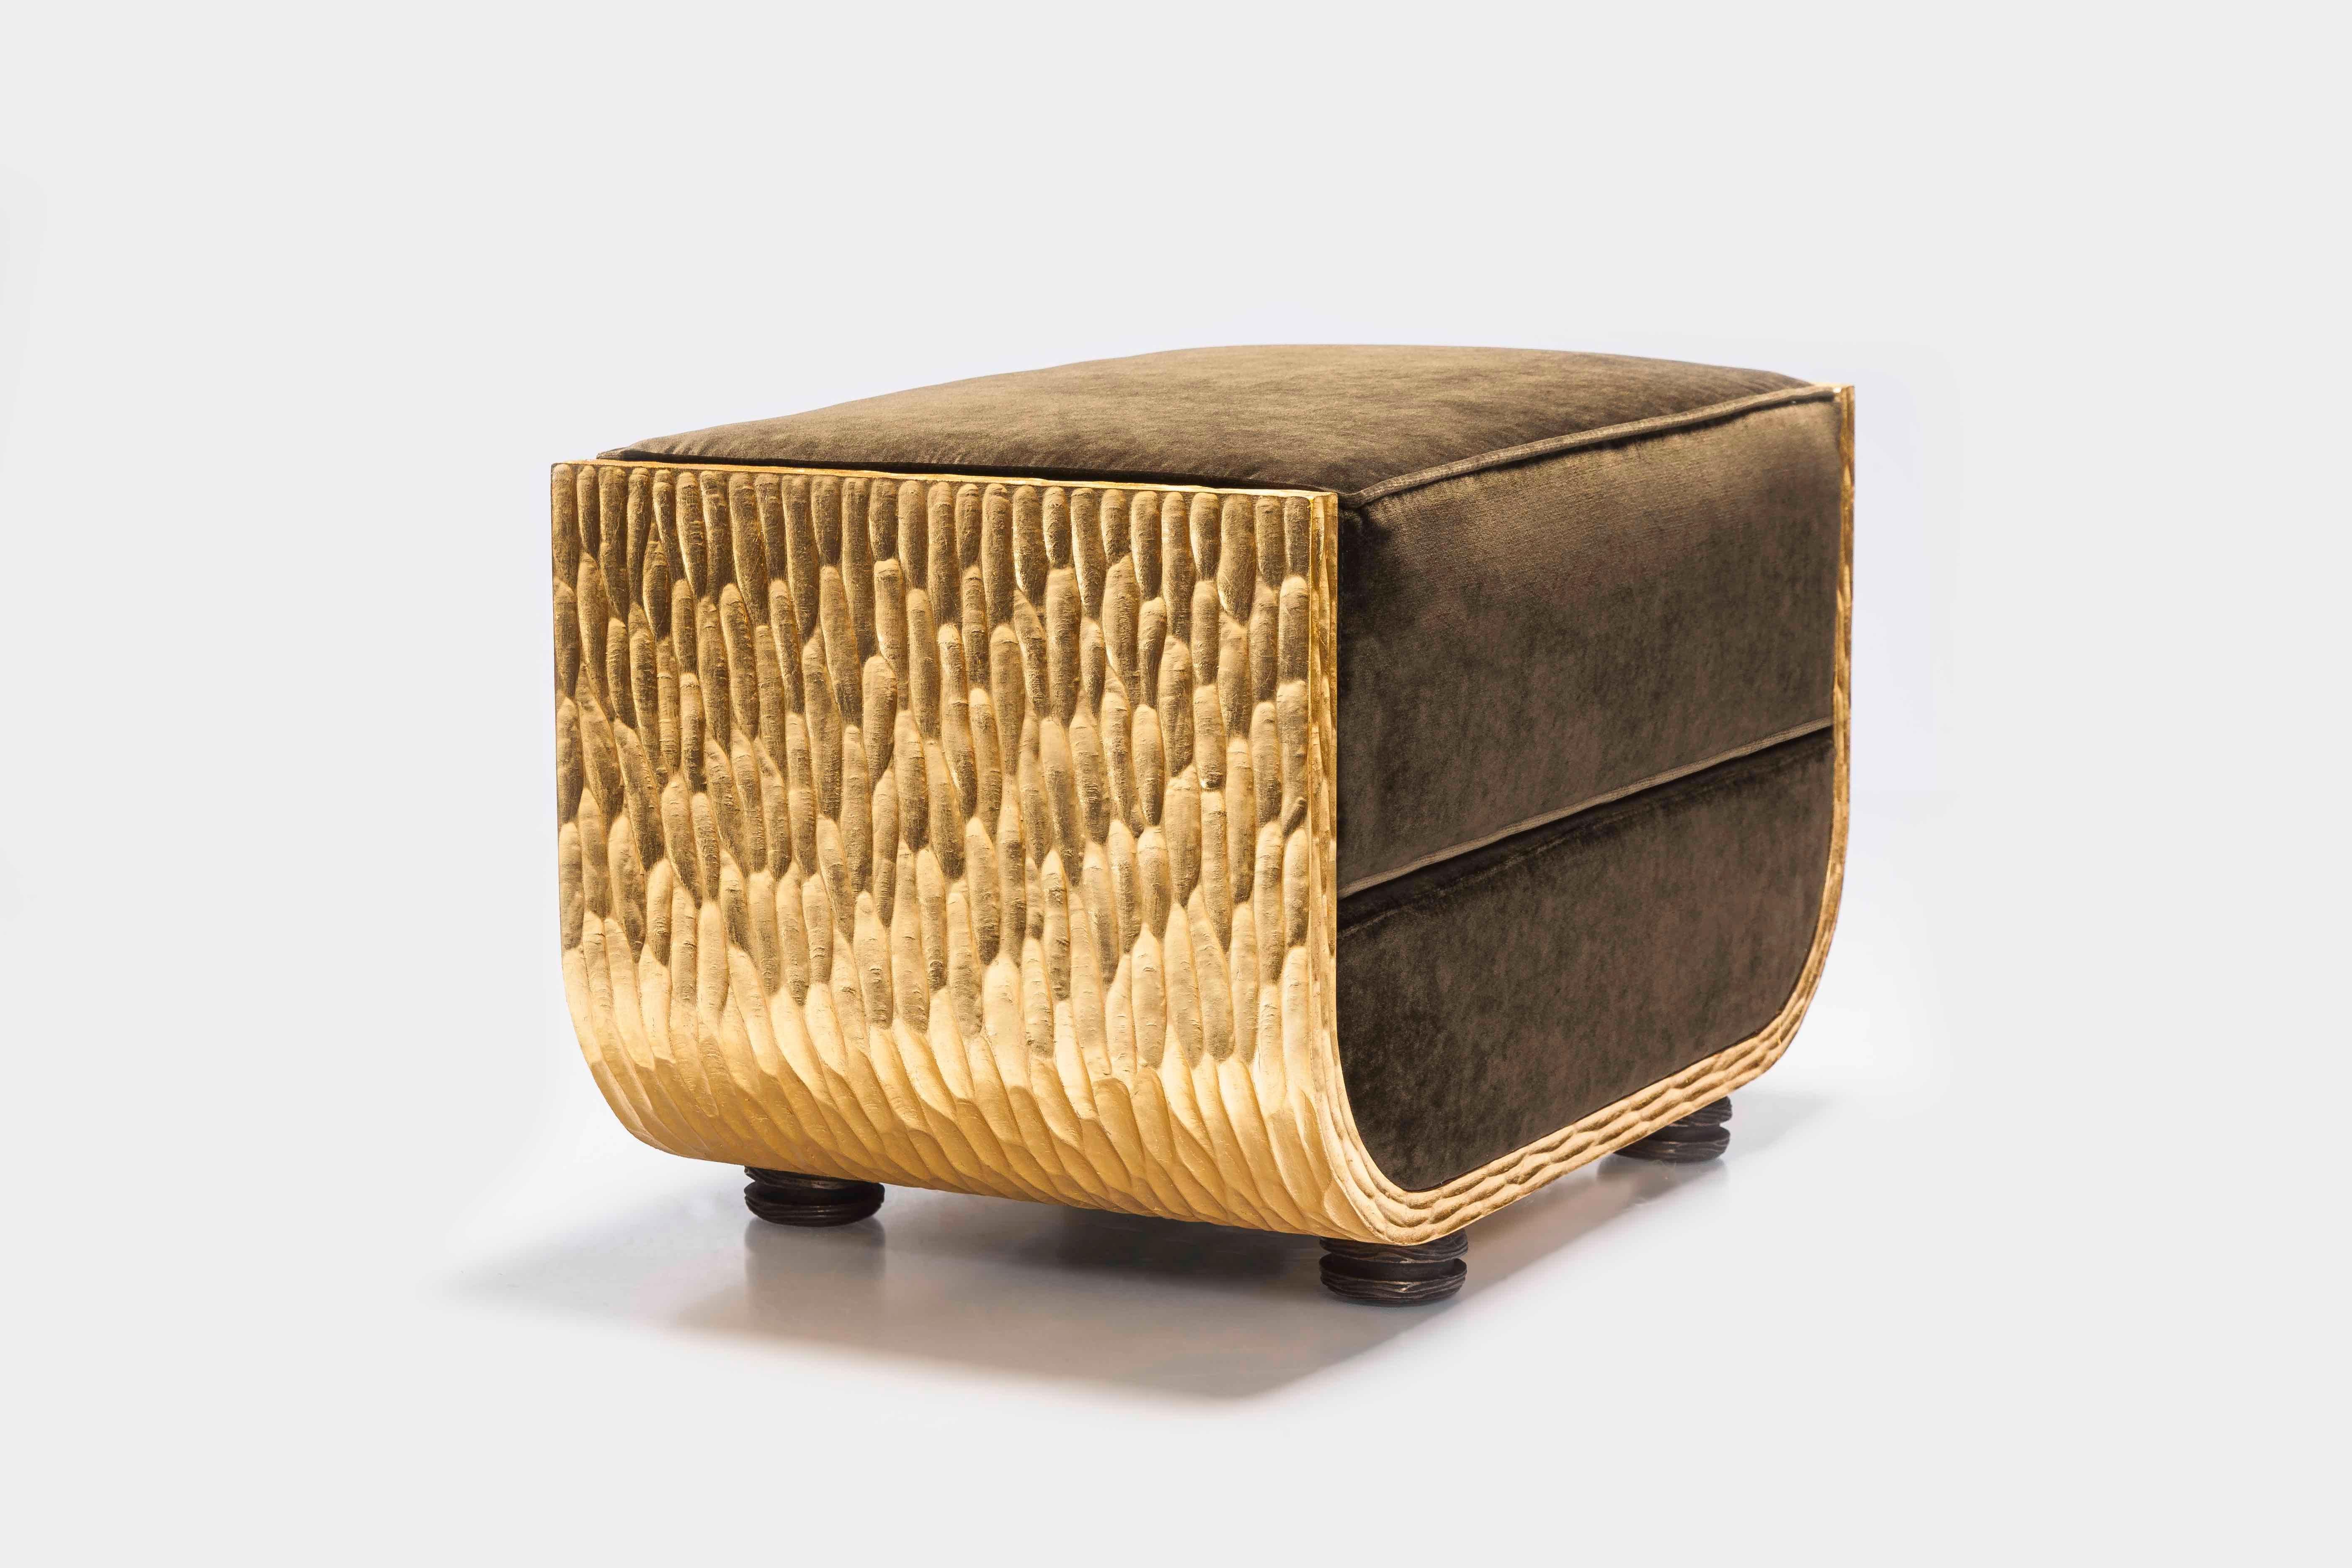 Kaa stool by Francis Sultana (all prices exclude delivery).